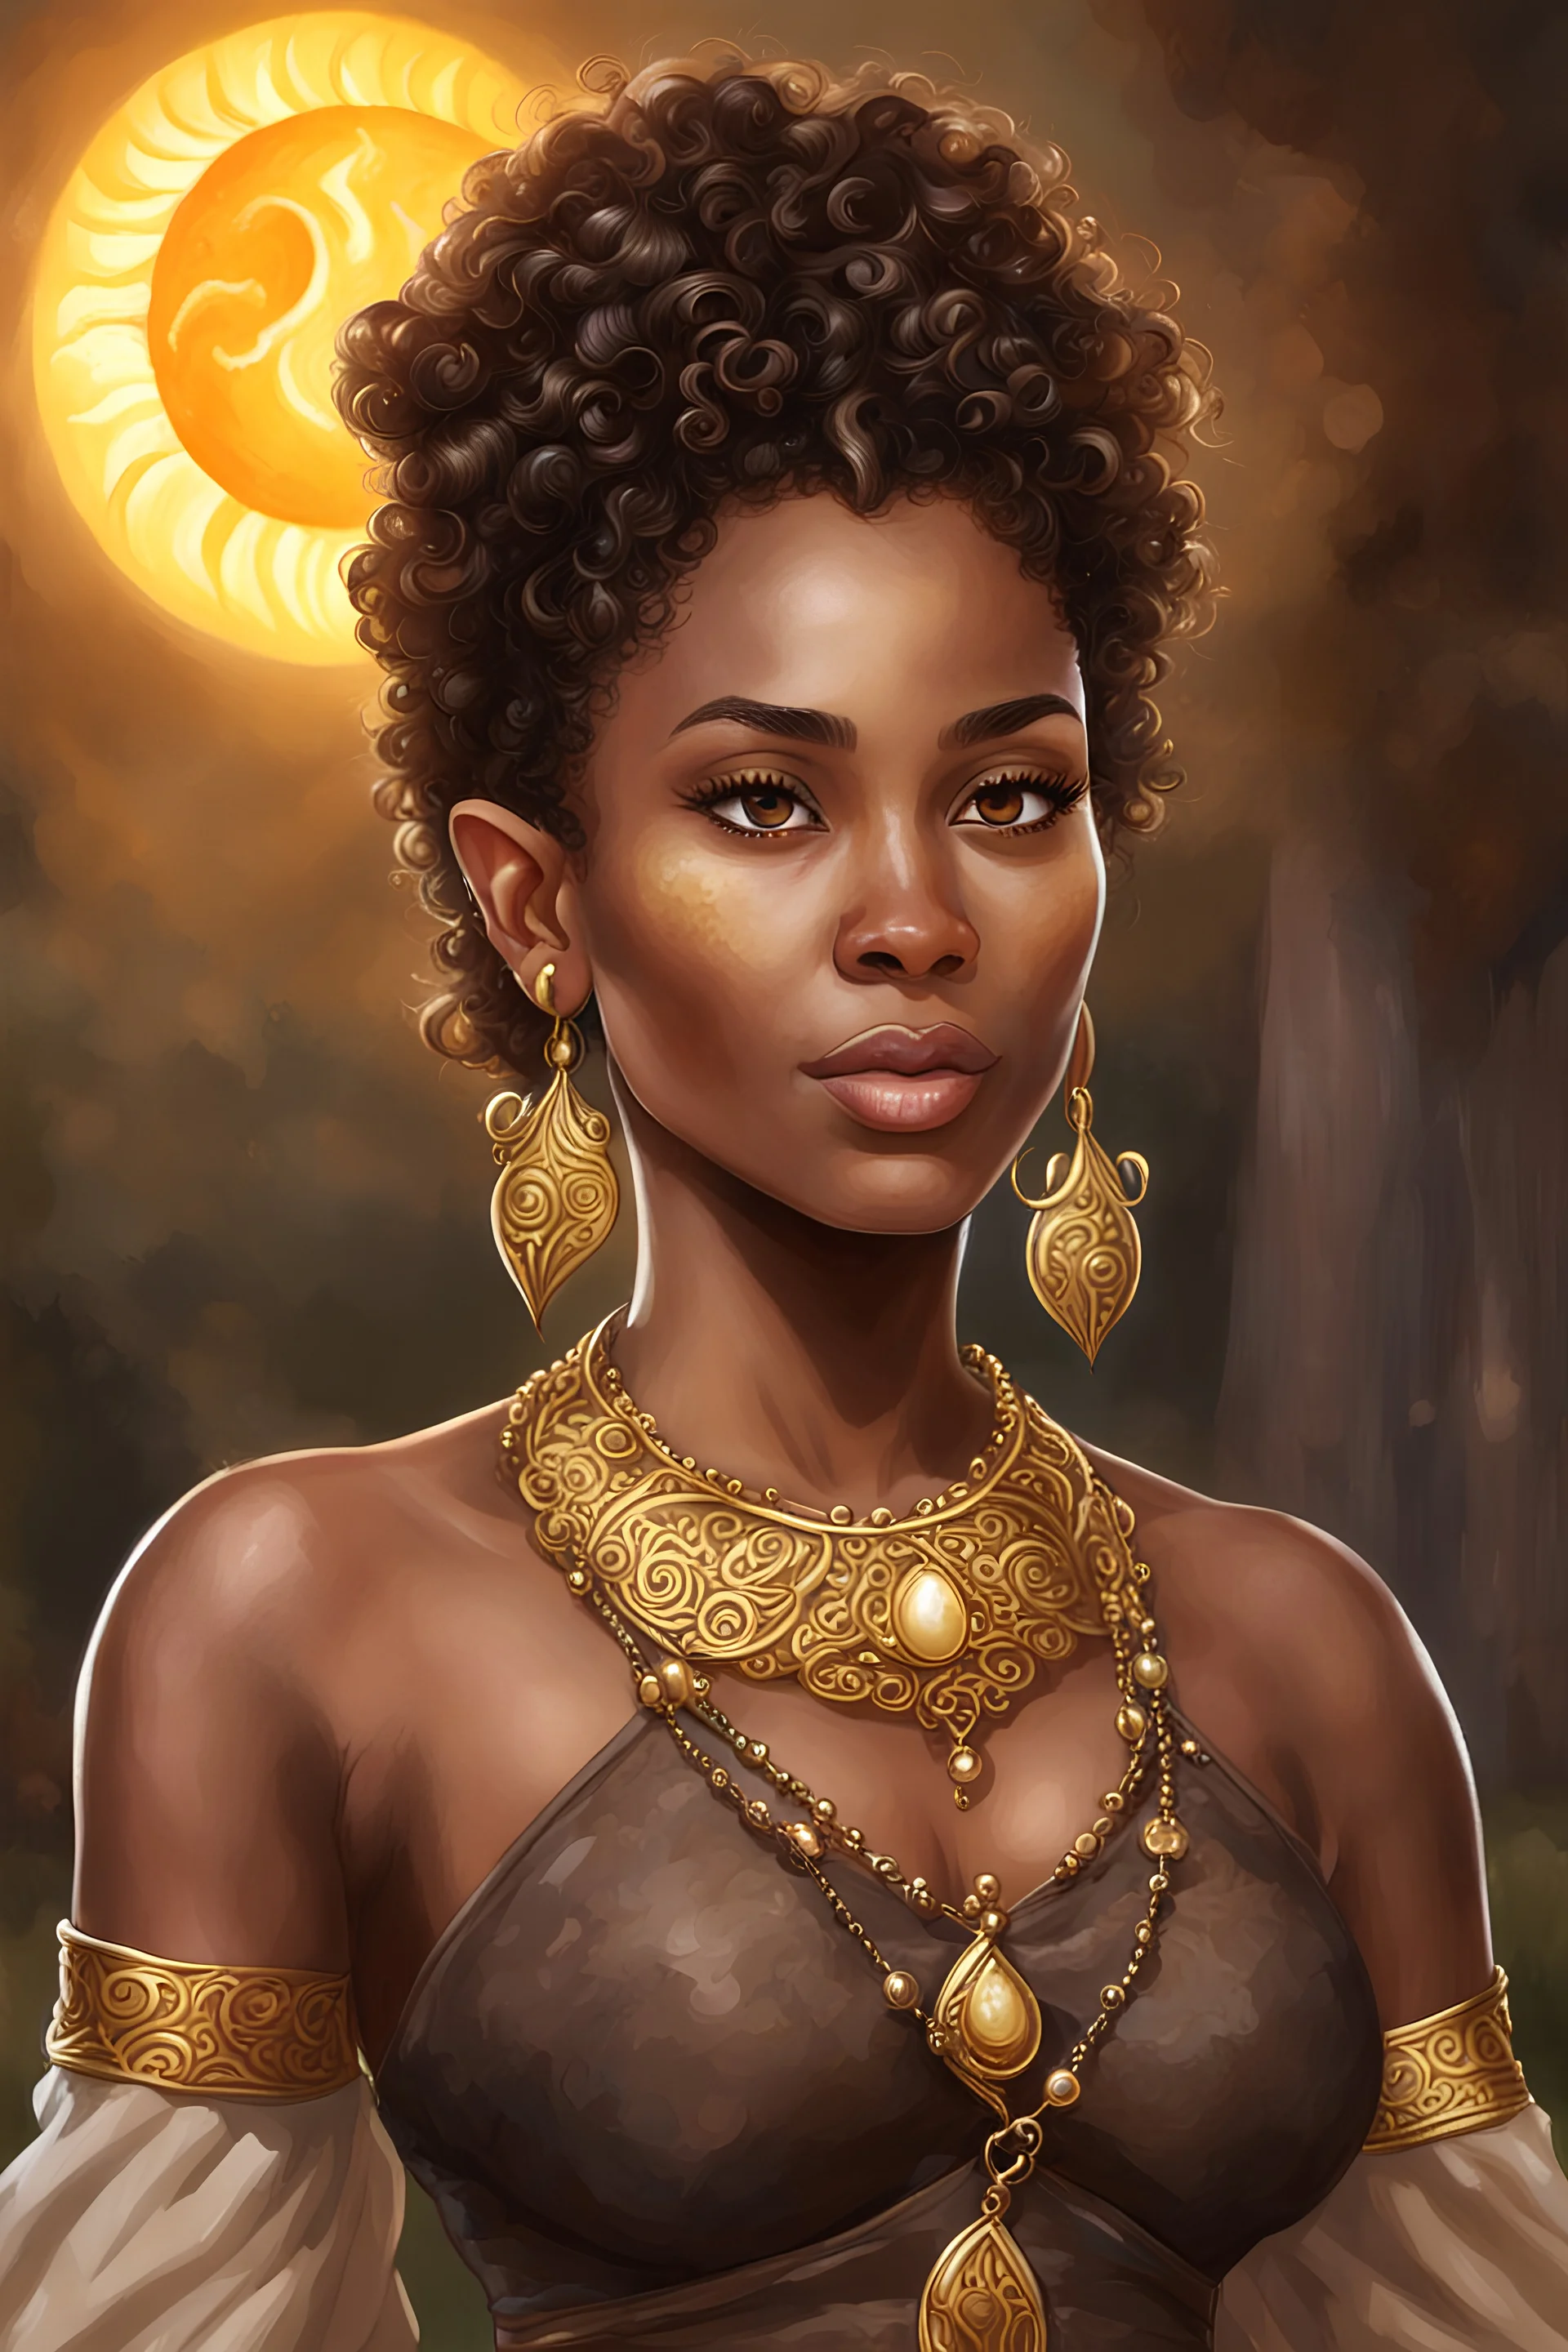 38 years old black woman, elf, brown color eyes, brown small puffy curly ponytail, wears ringmail, necklase with a symbol of sun, no earings